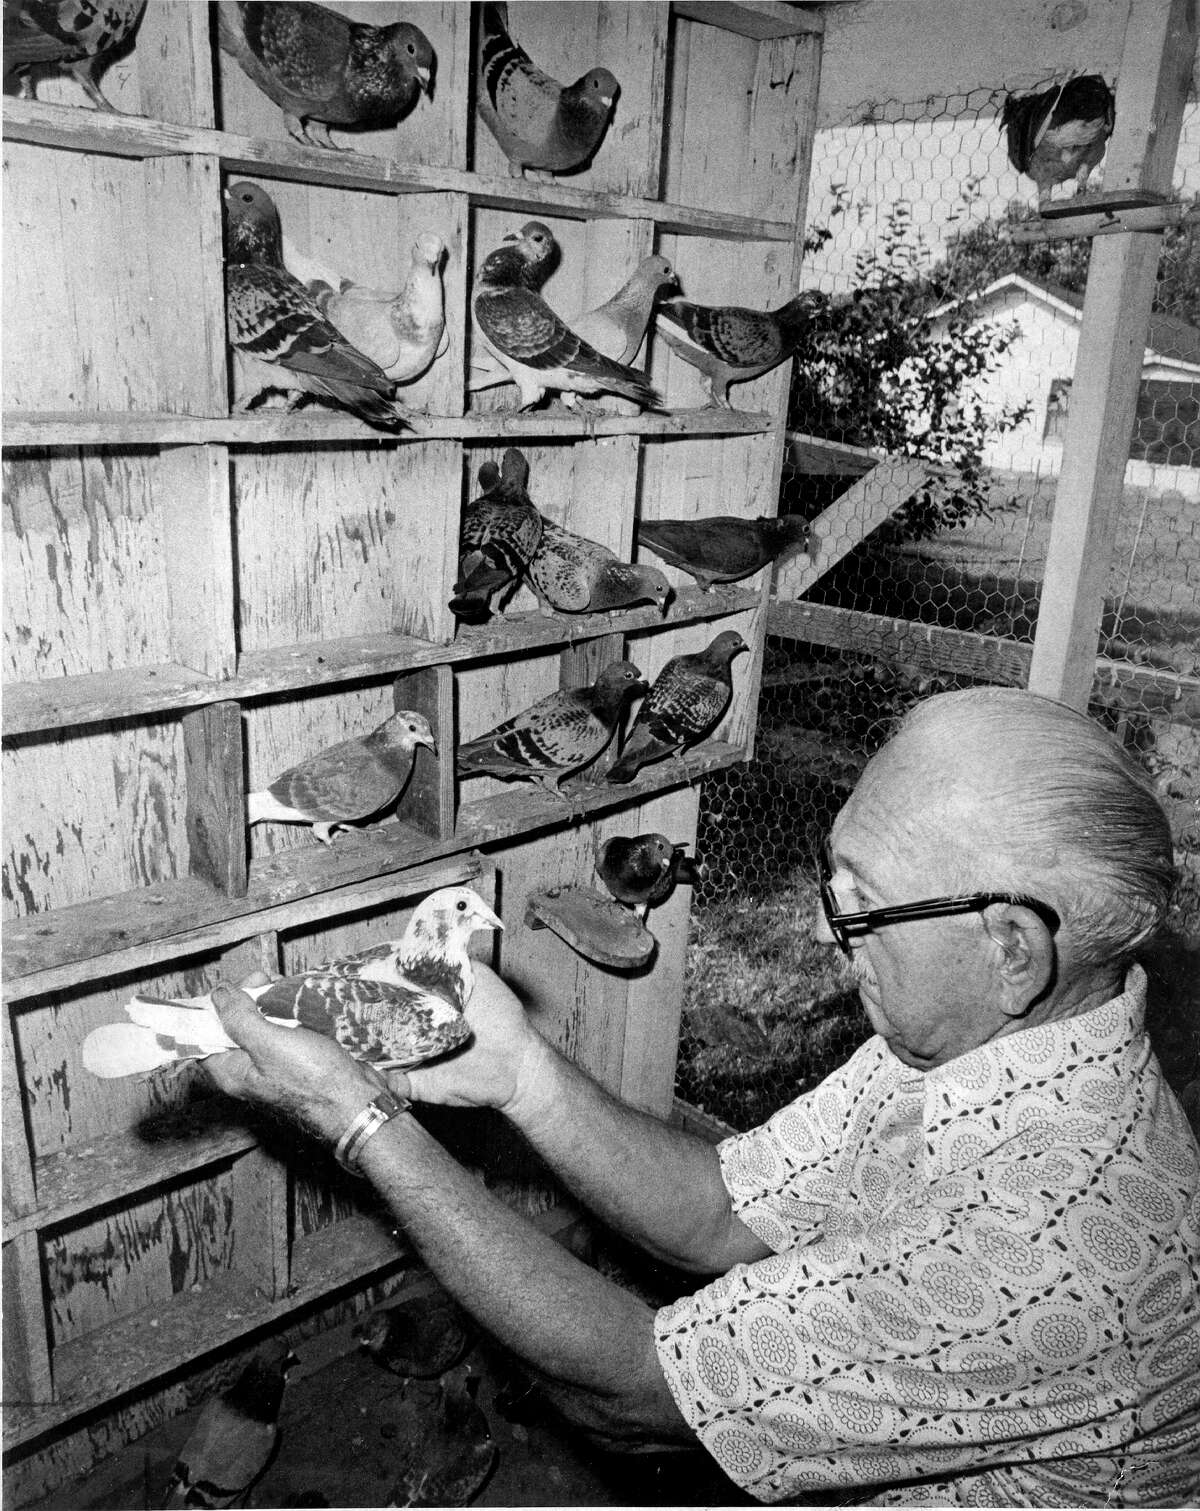 Bill Goodspeed, former Express-News photographer, holds one of of the homing pigeons used to send film in to be processed in this 1976 photo.